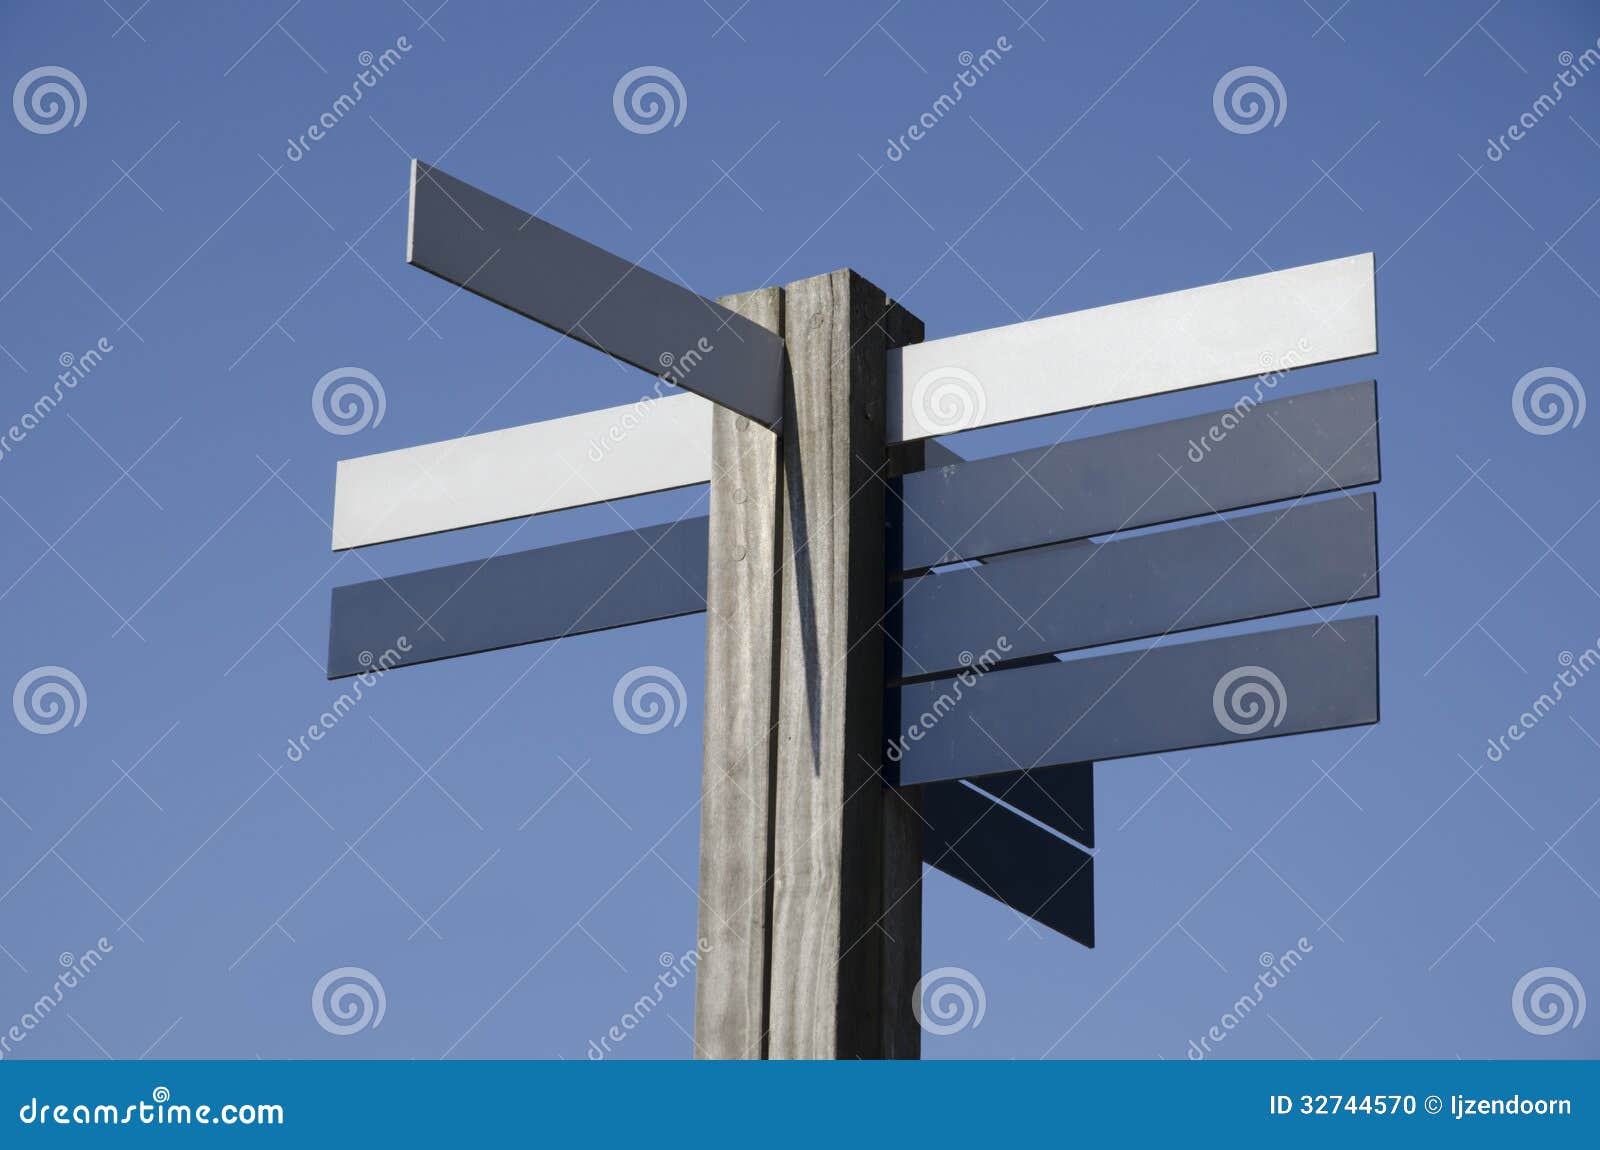 roadsign-with-multiple-directions-stock-photo-image-of-traffic-concept-32744570